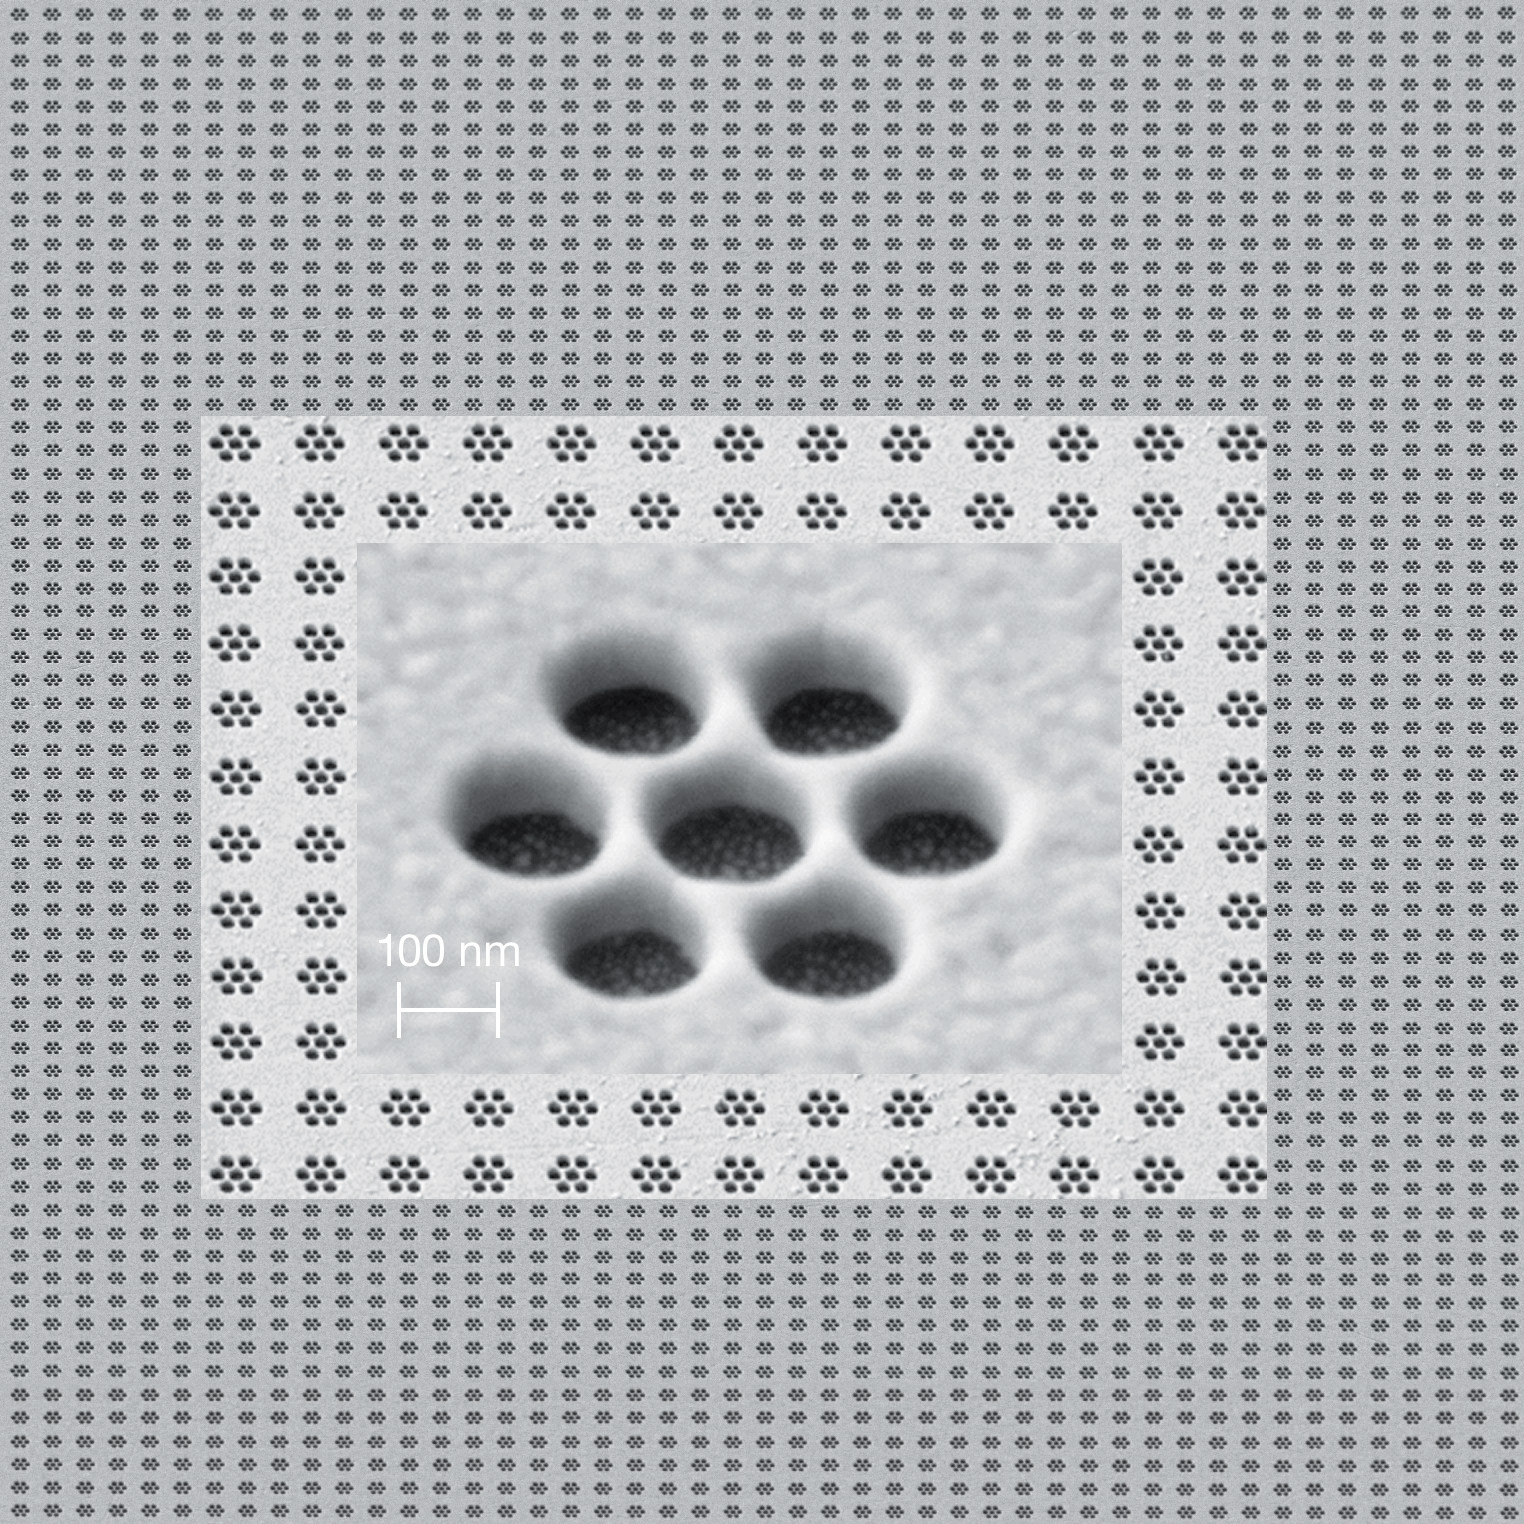 SEM image of Large plasmonic array of small features